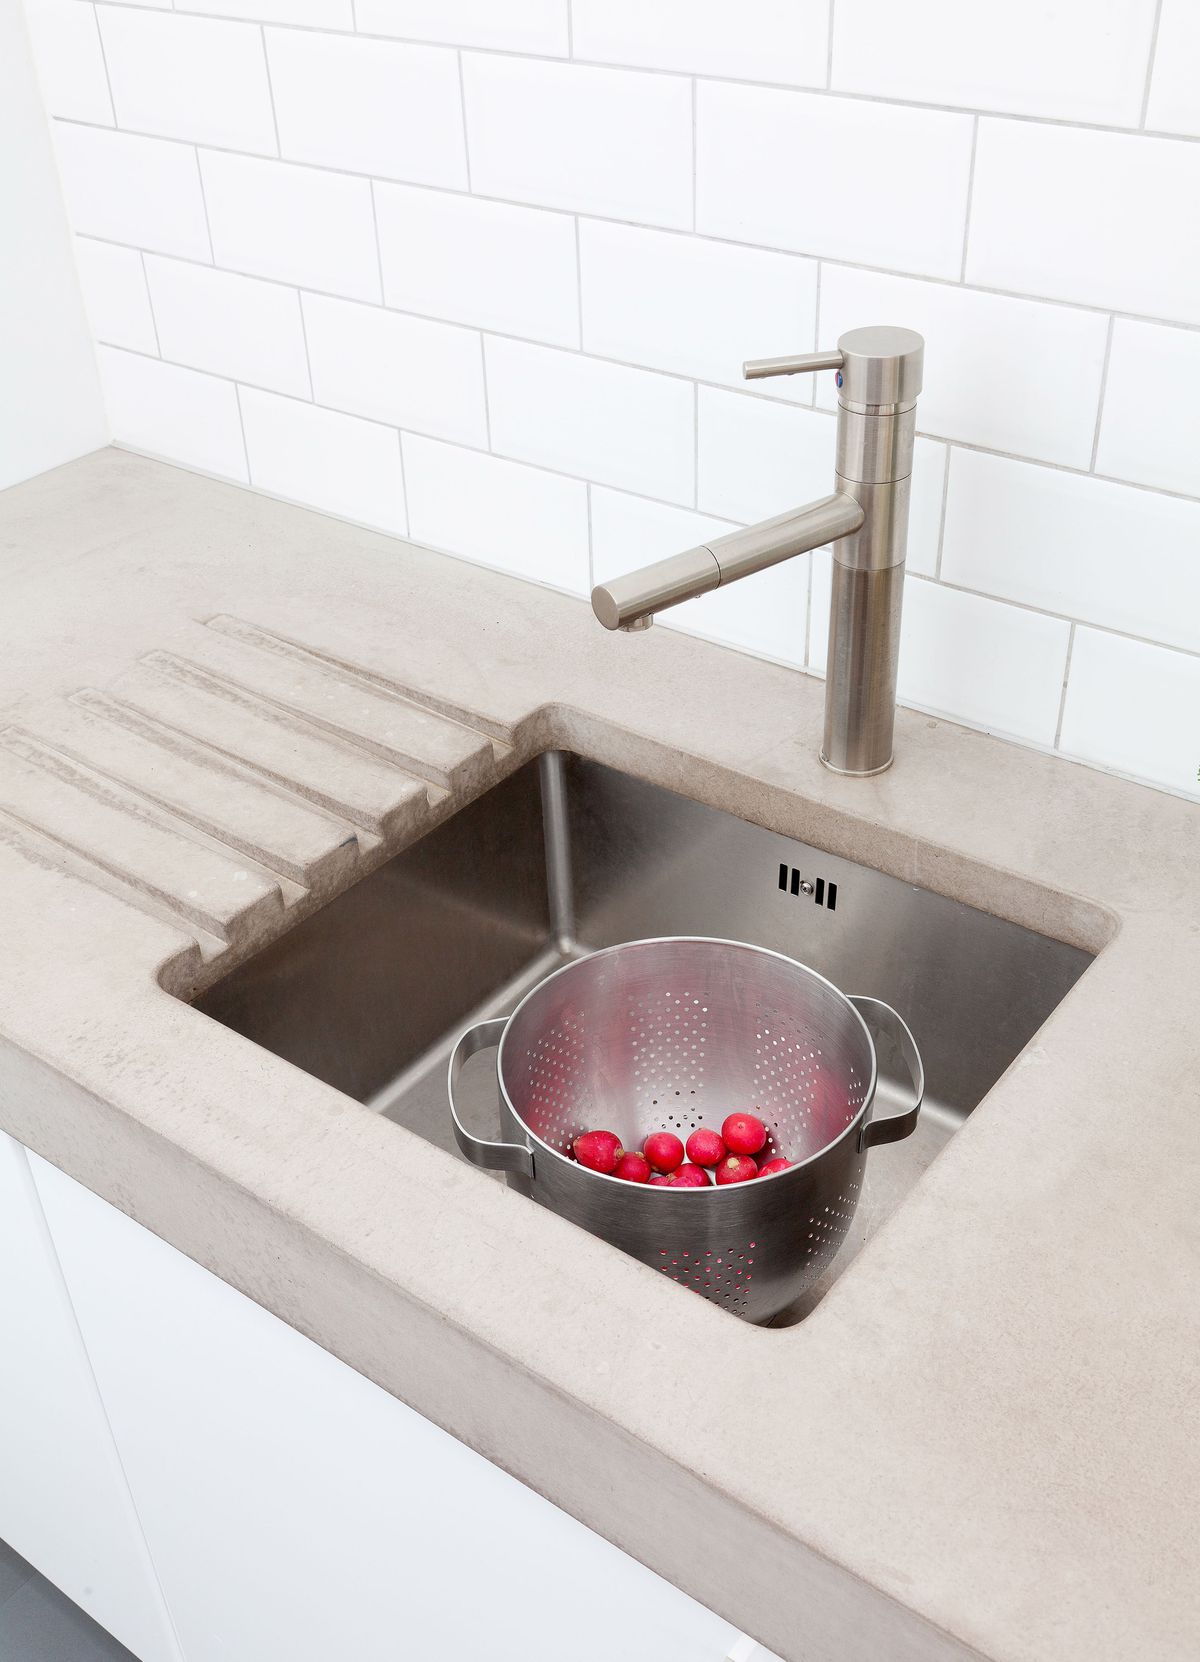 A kitchen sink with a concrete countertop.